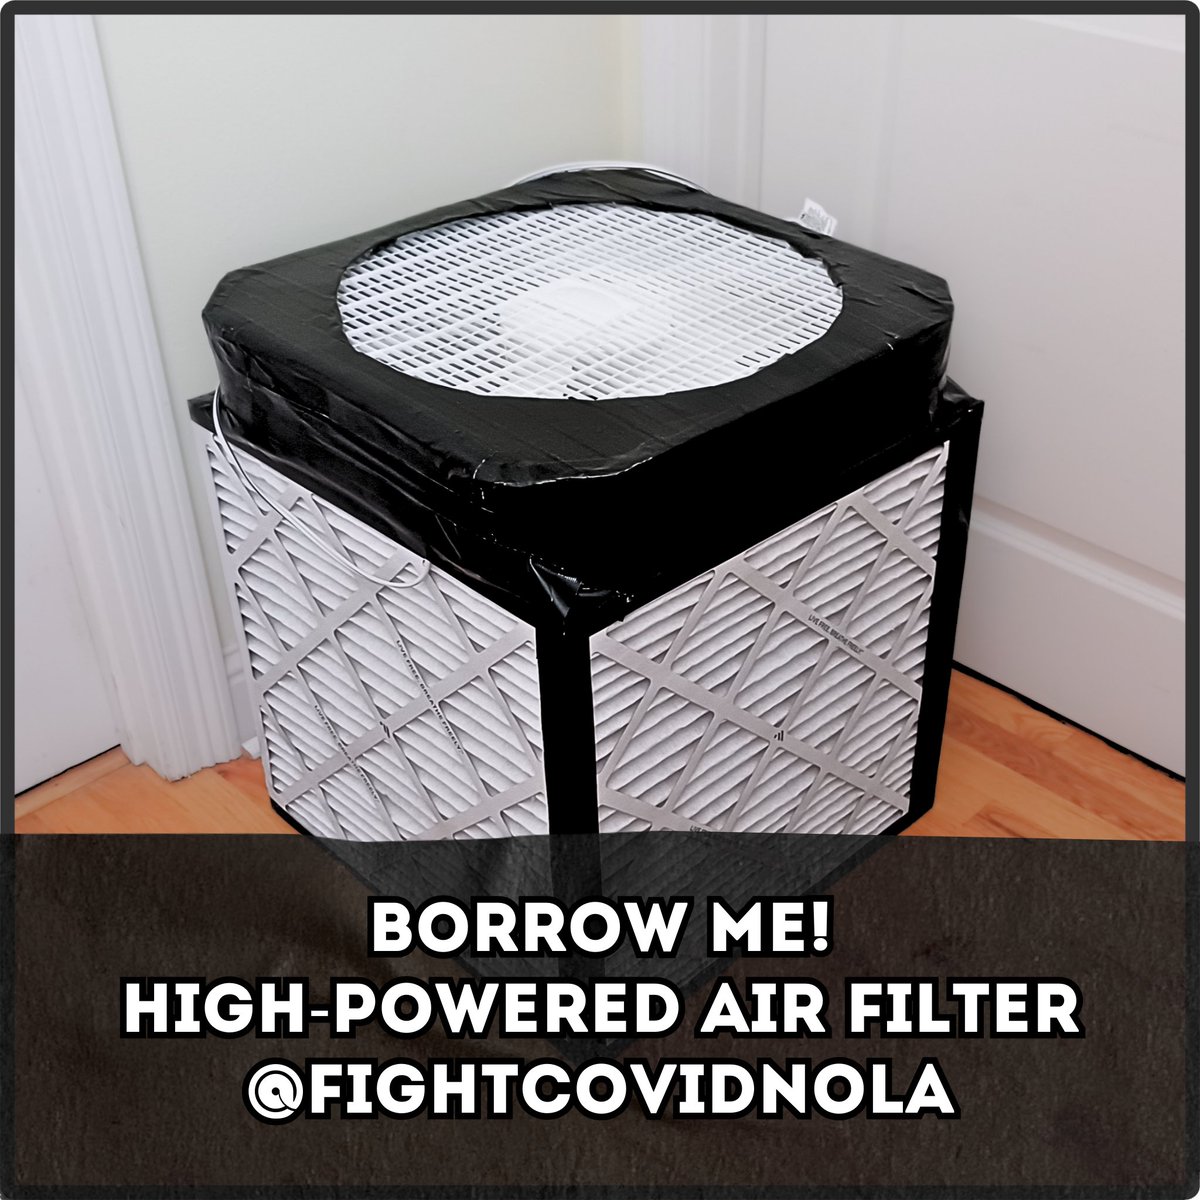 Thanks to Mutual Aid Roundup, we now have a dedicated air purifier
(DIY HEPA filter aka #CorsiRosenthalBox)
to lend out for events, home isolation*, & more!

If you're planning an event you'd like to make safer, reach out!